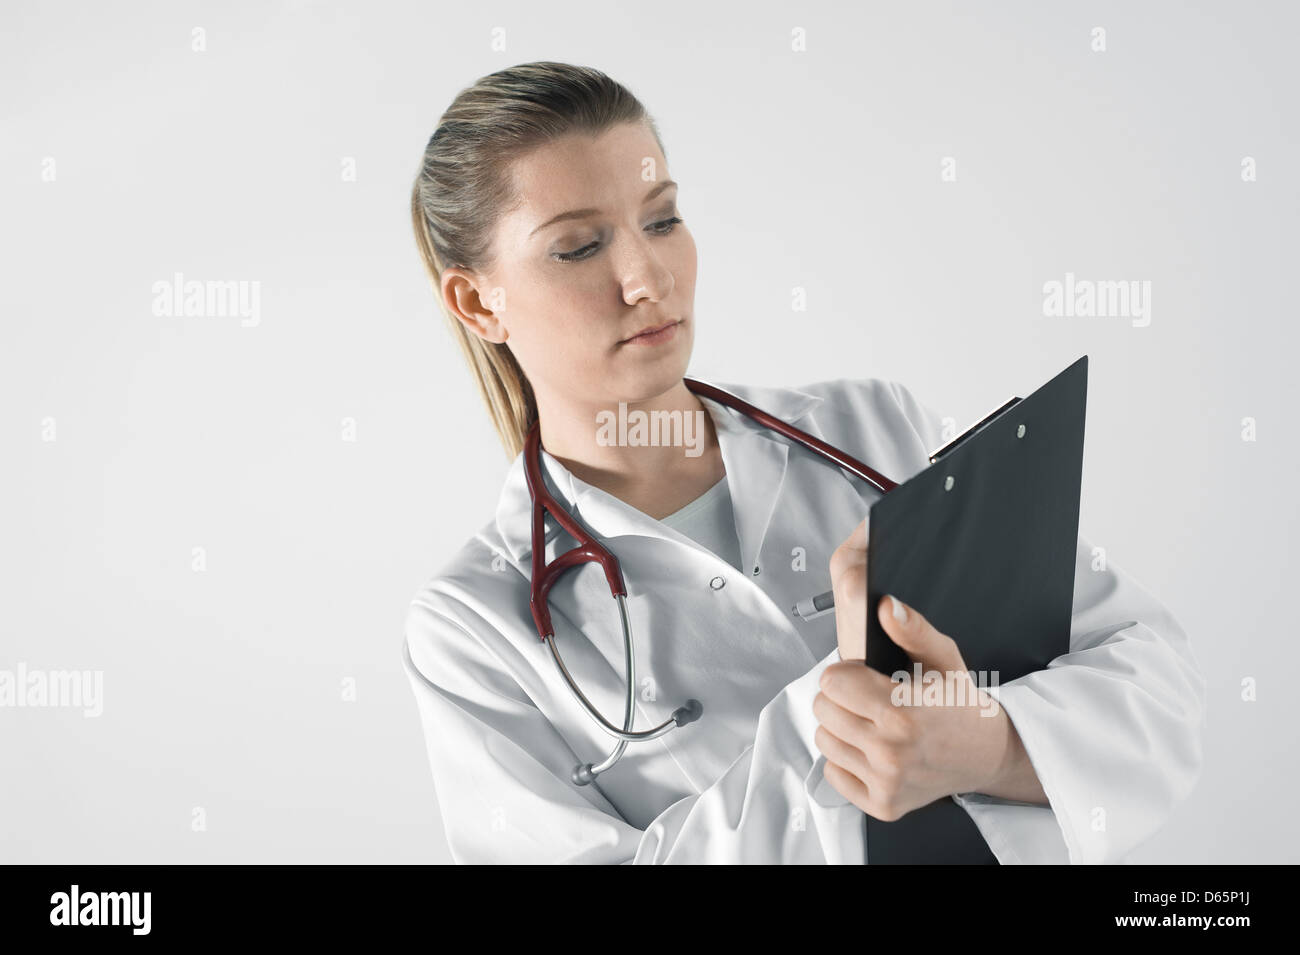 Young female doctor with stethoscope et le bloc-notes Banque D'Images